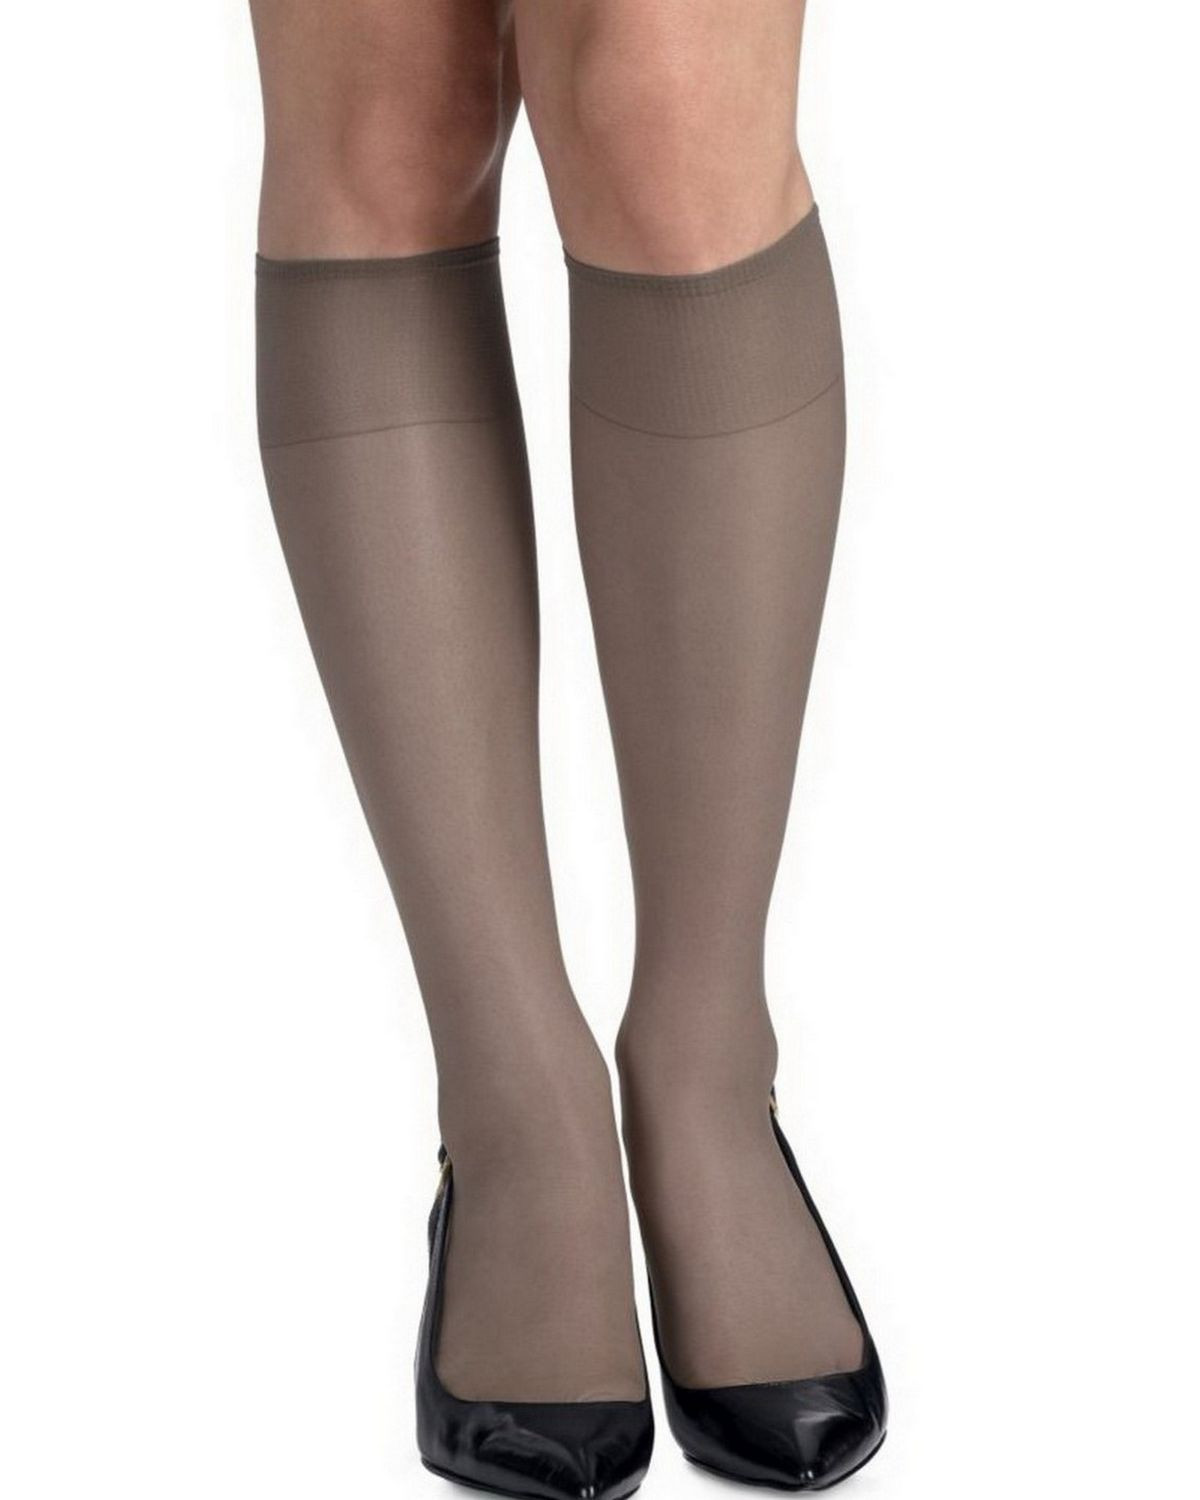 Hanes 775 Women's Silk Reflections Silky Sheer Knee Highs Reinforced Toe 2-Pack - Barely Black - One Size #silk